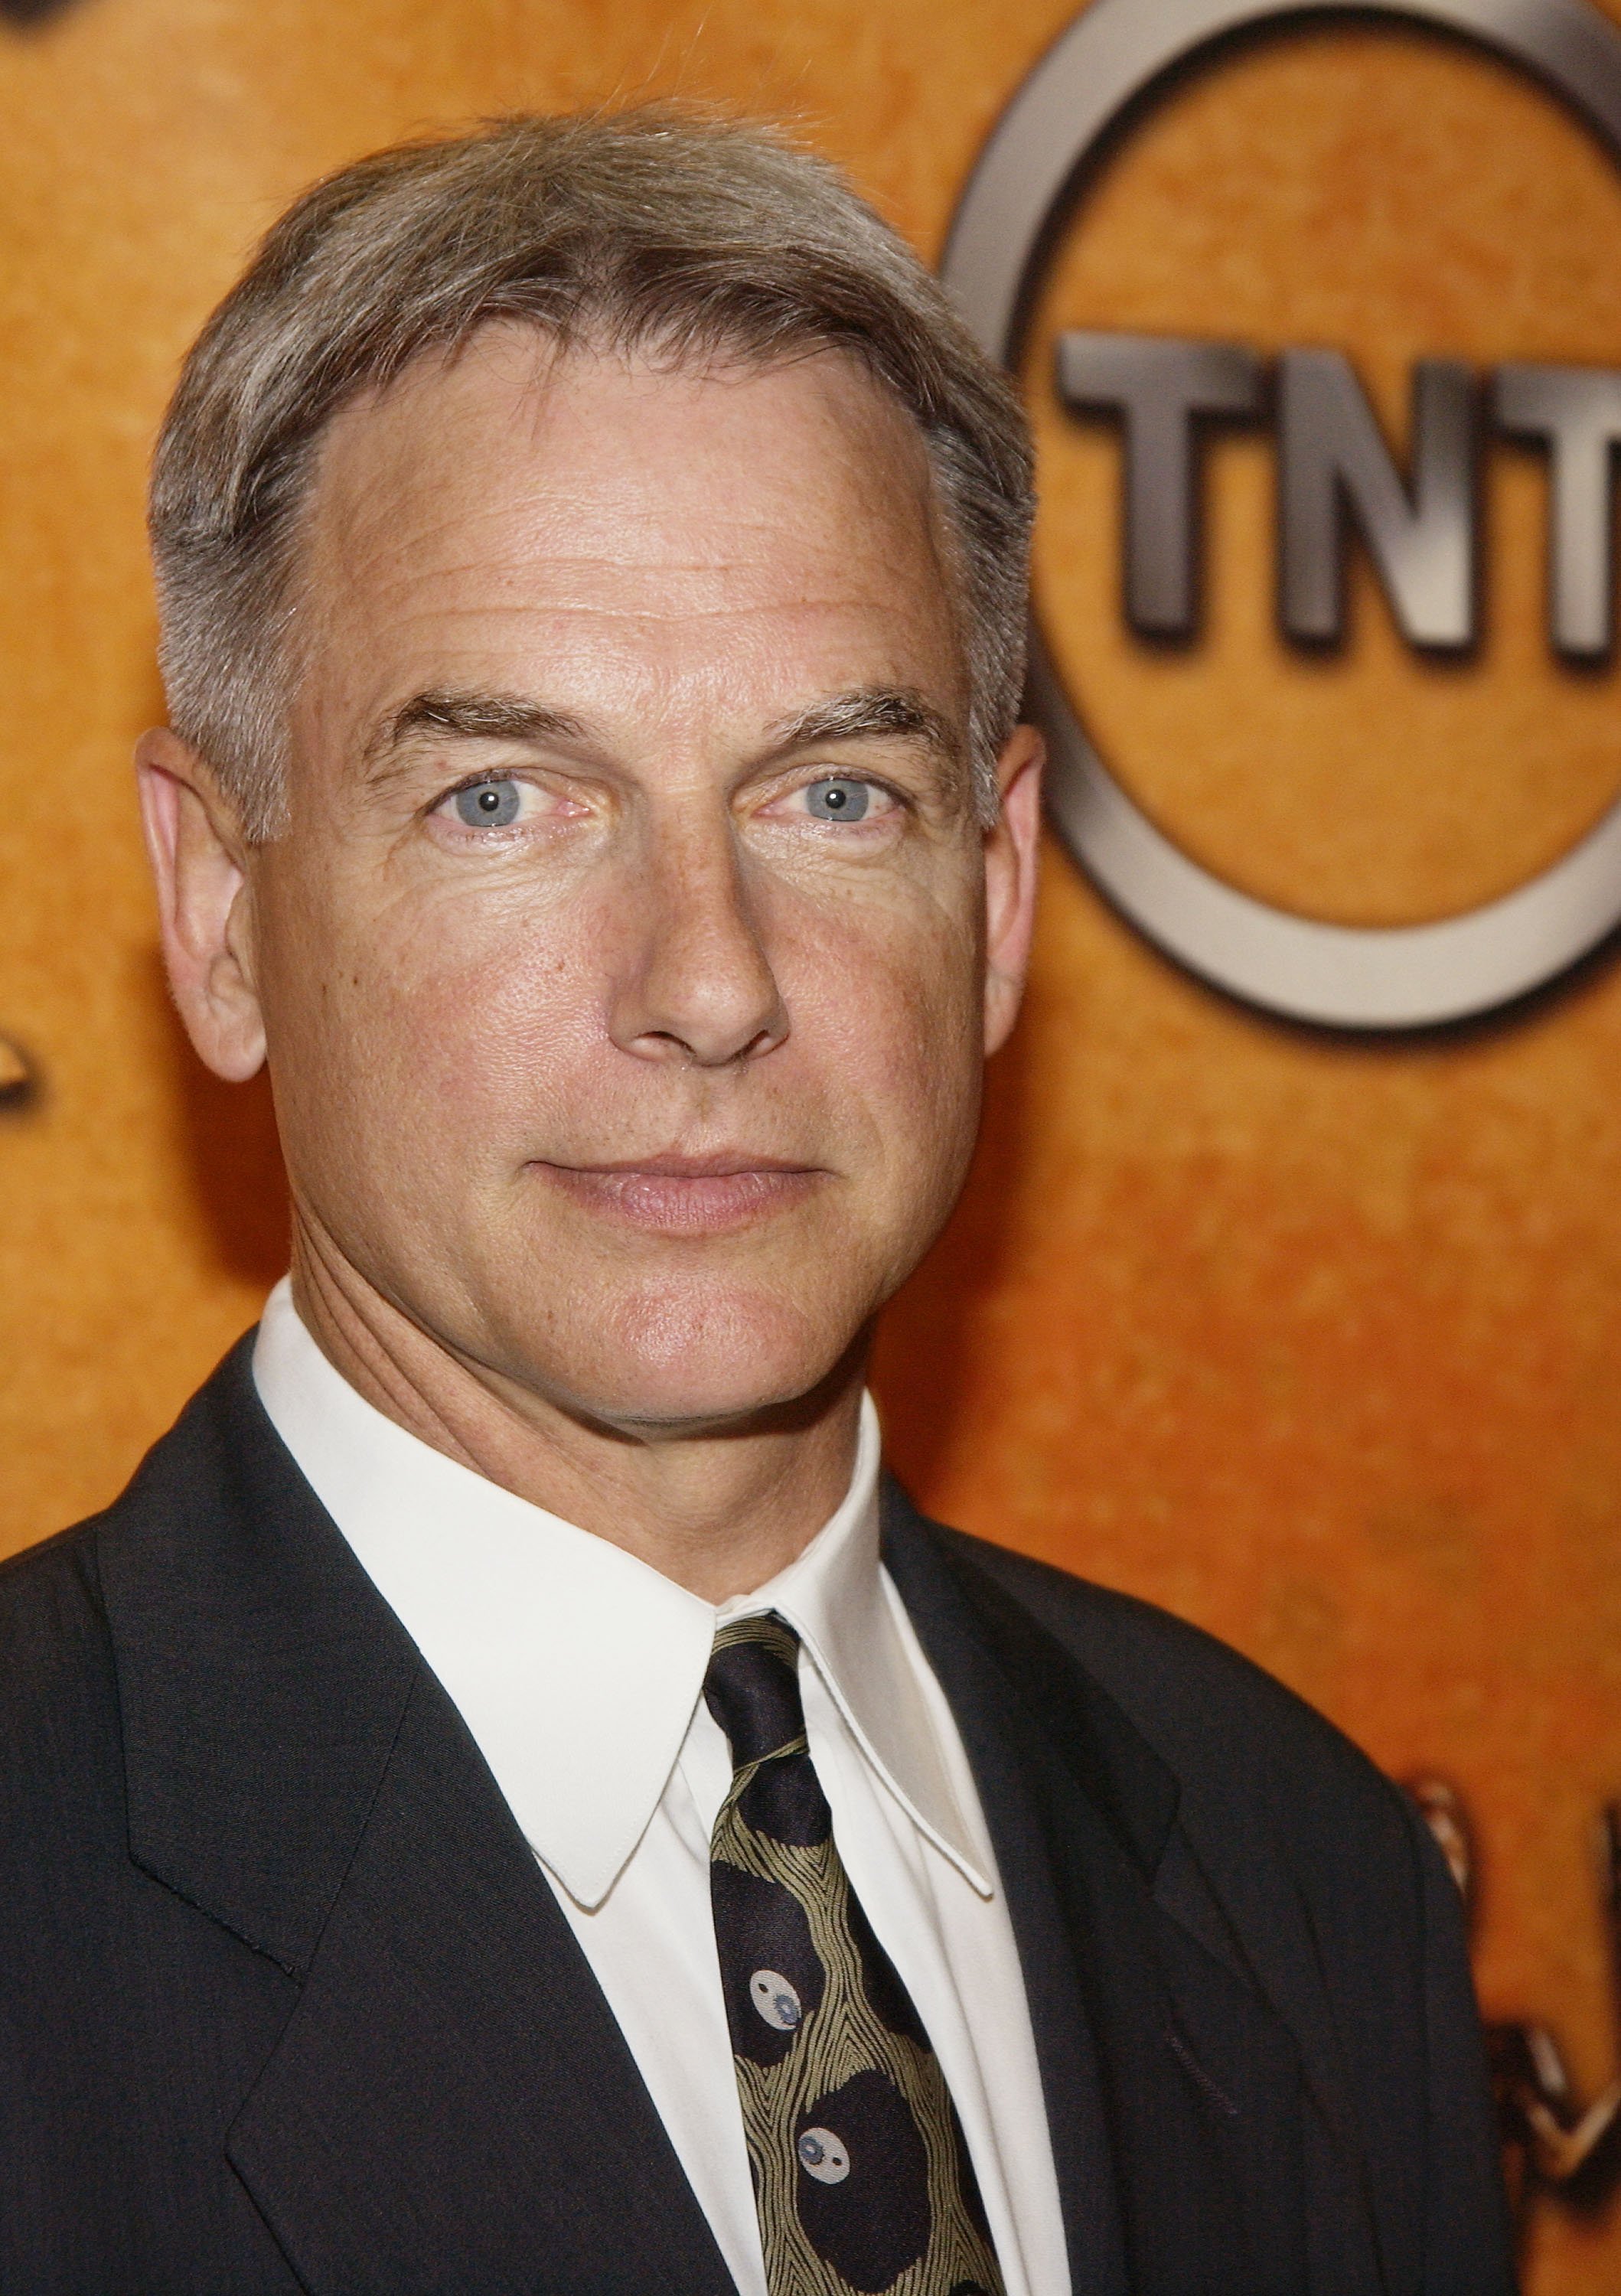 Mark Harmon attends the 10th Annual Screen Actors Guild Awards Nominations in Hollywood, California on January 15, 2004 | Photo: Getty Images